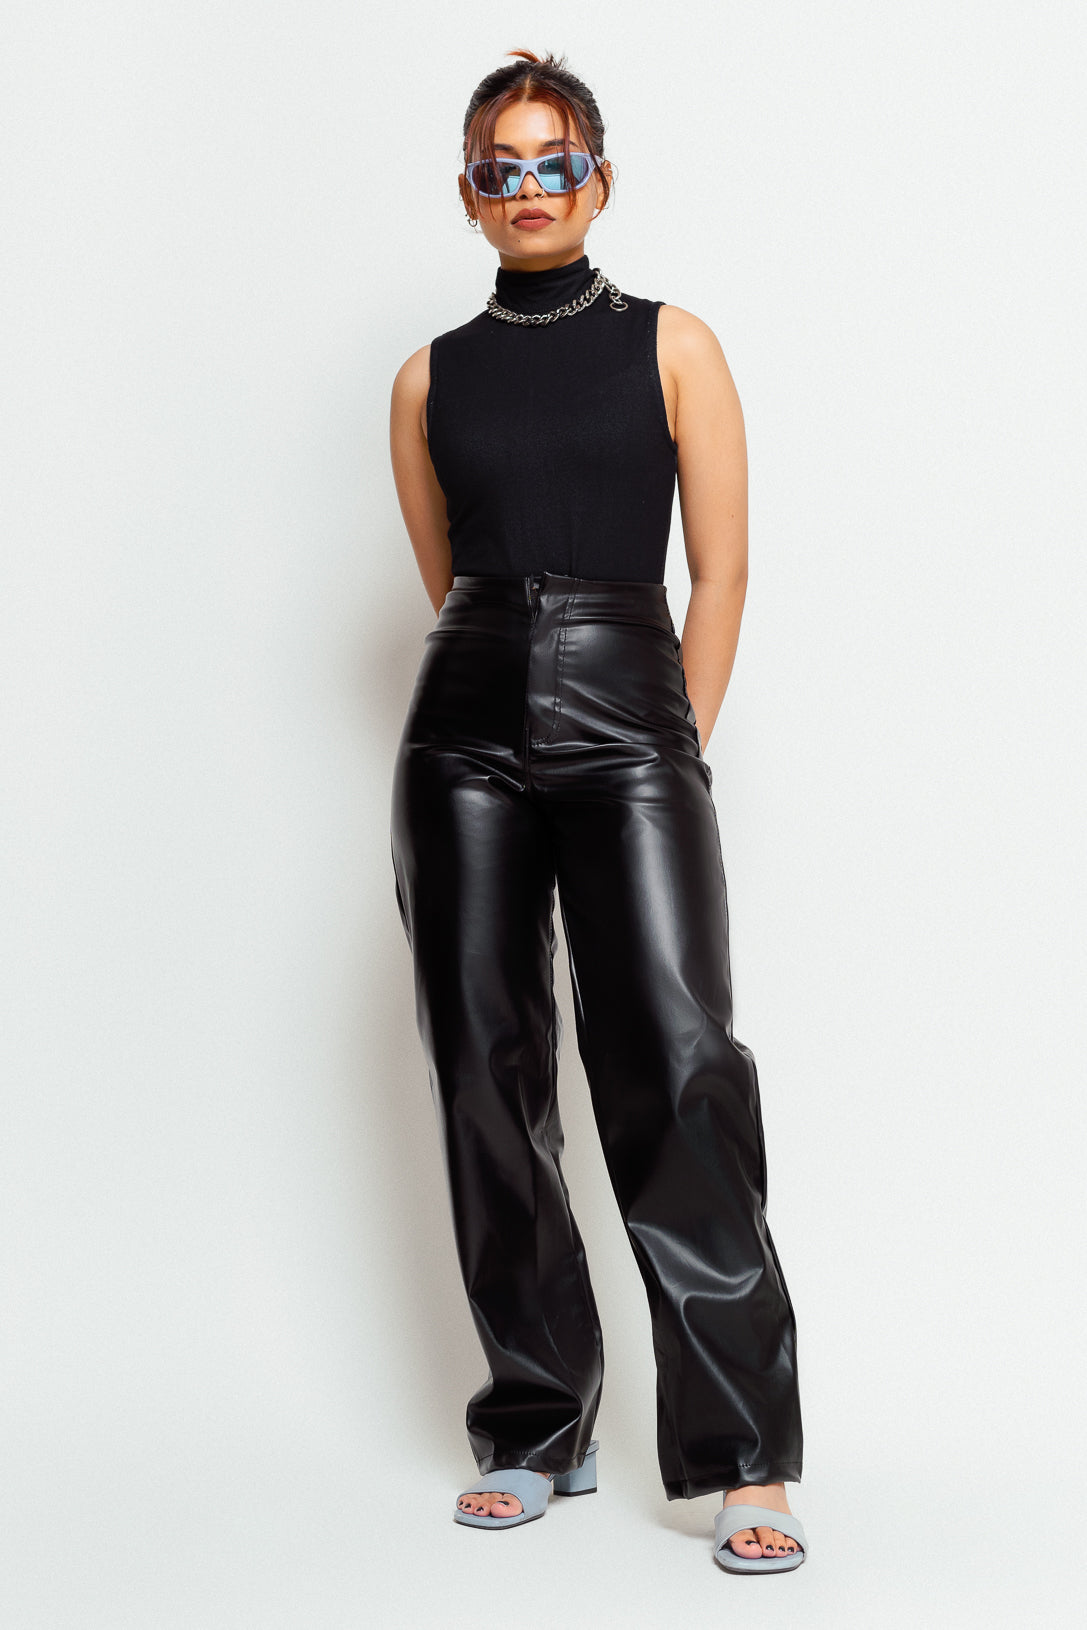 Ladies leather trousers  G World  Flickr